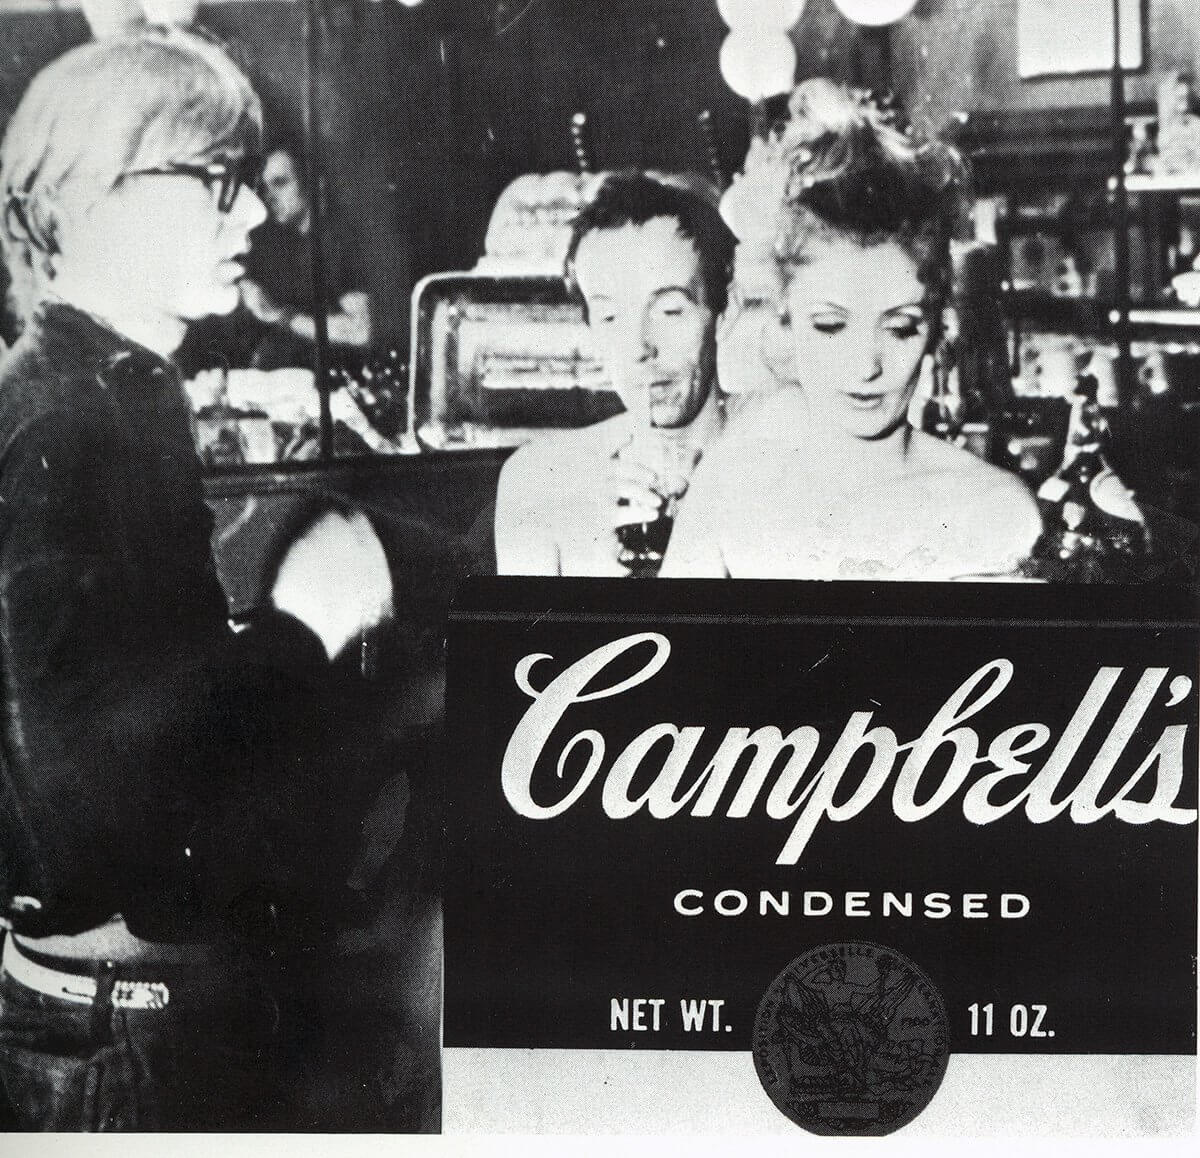 UST’s Art Gallery featured one of Andy Warhol’s “Campbell’s Soup Can” prints in 1968.